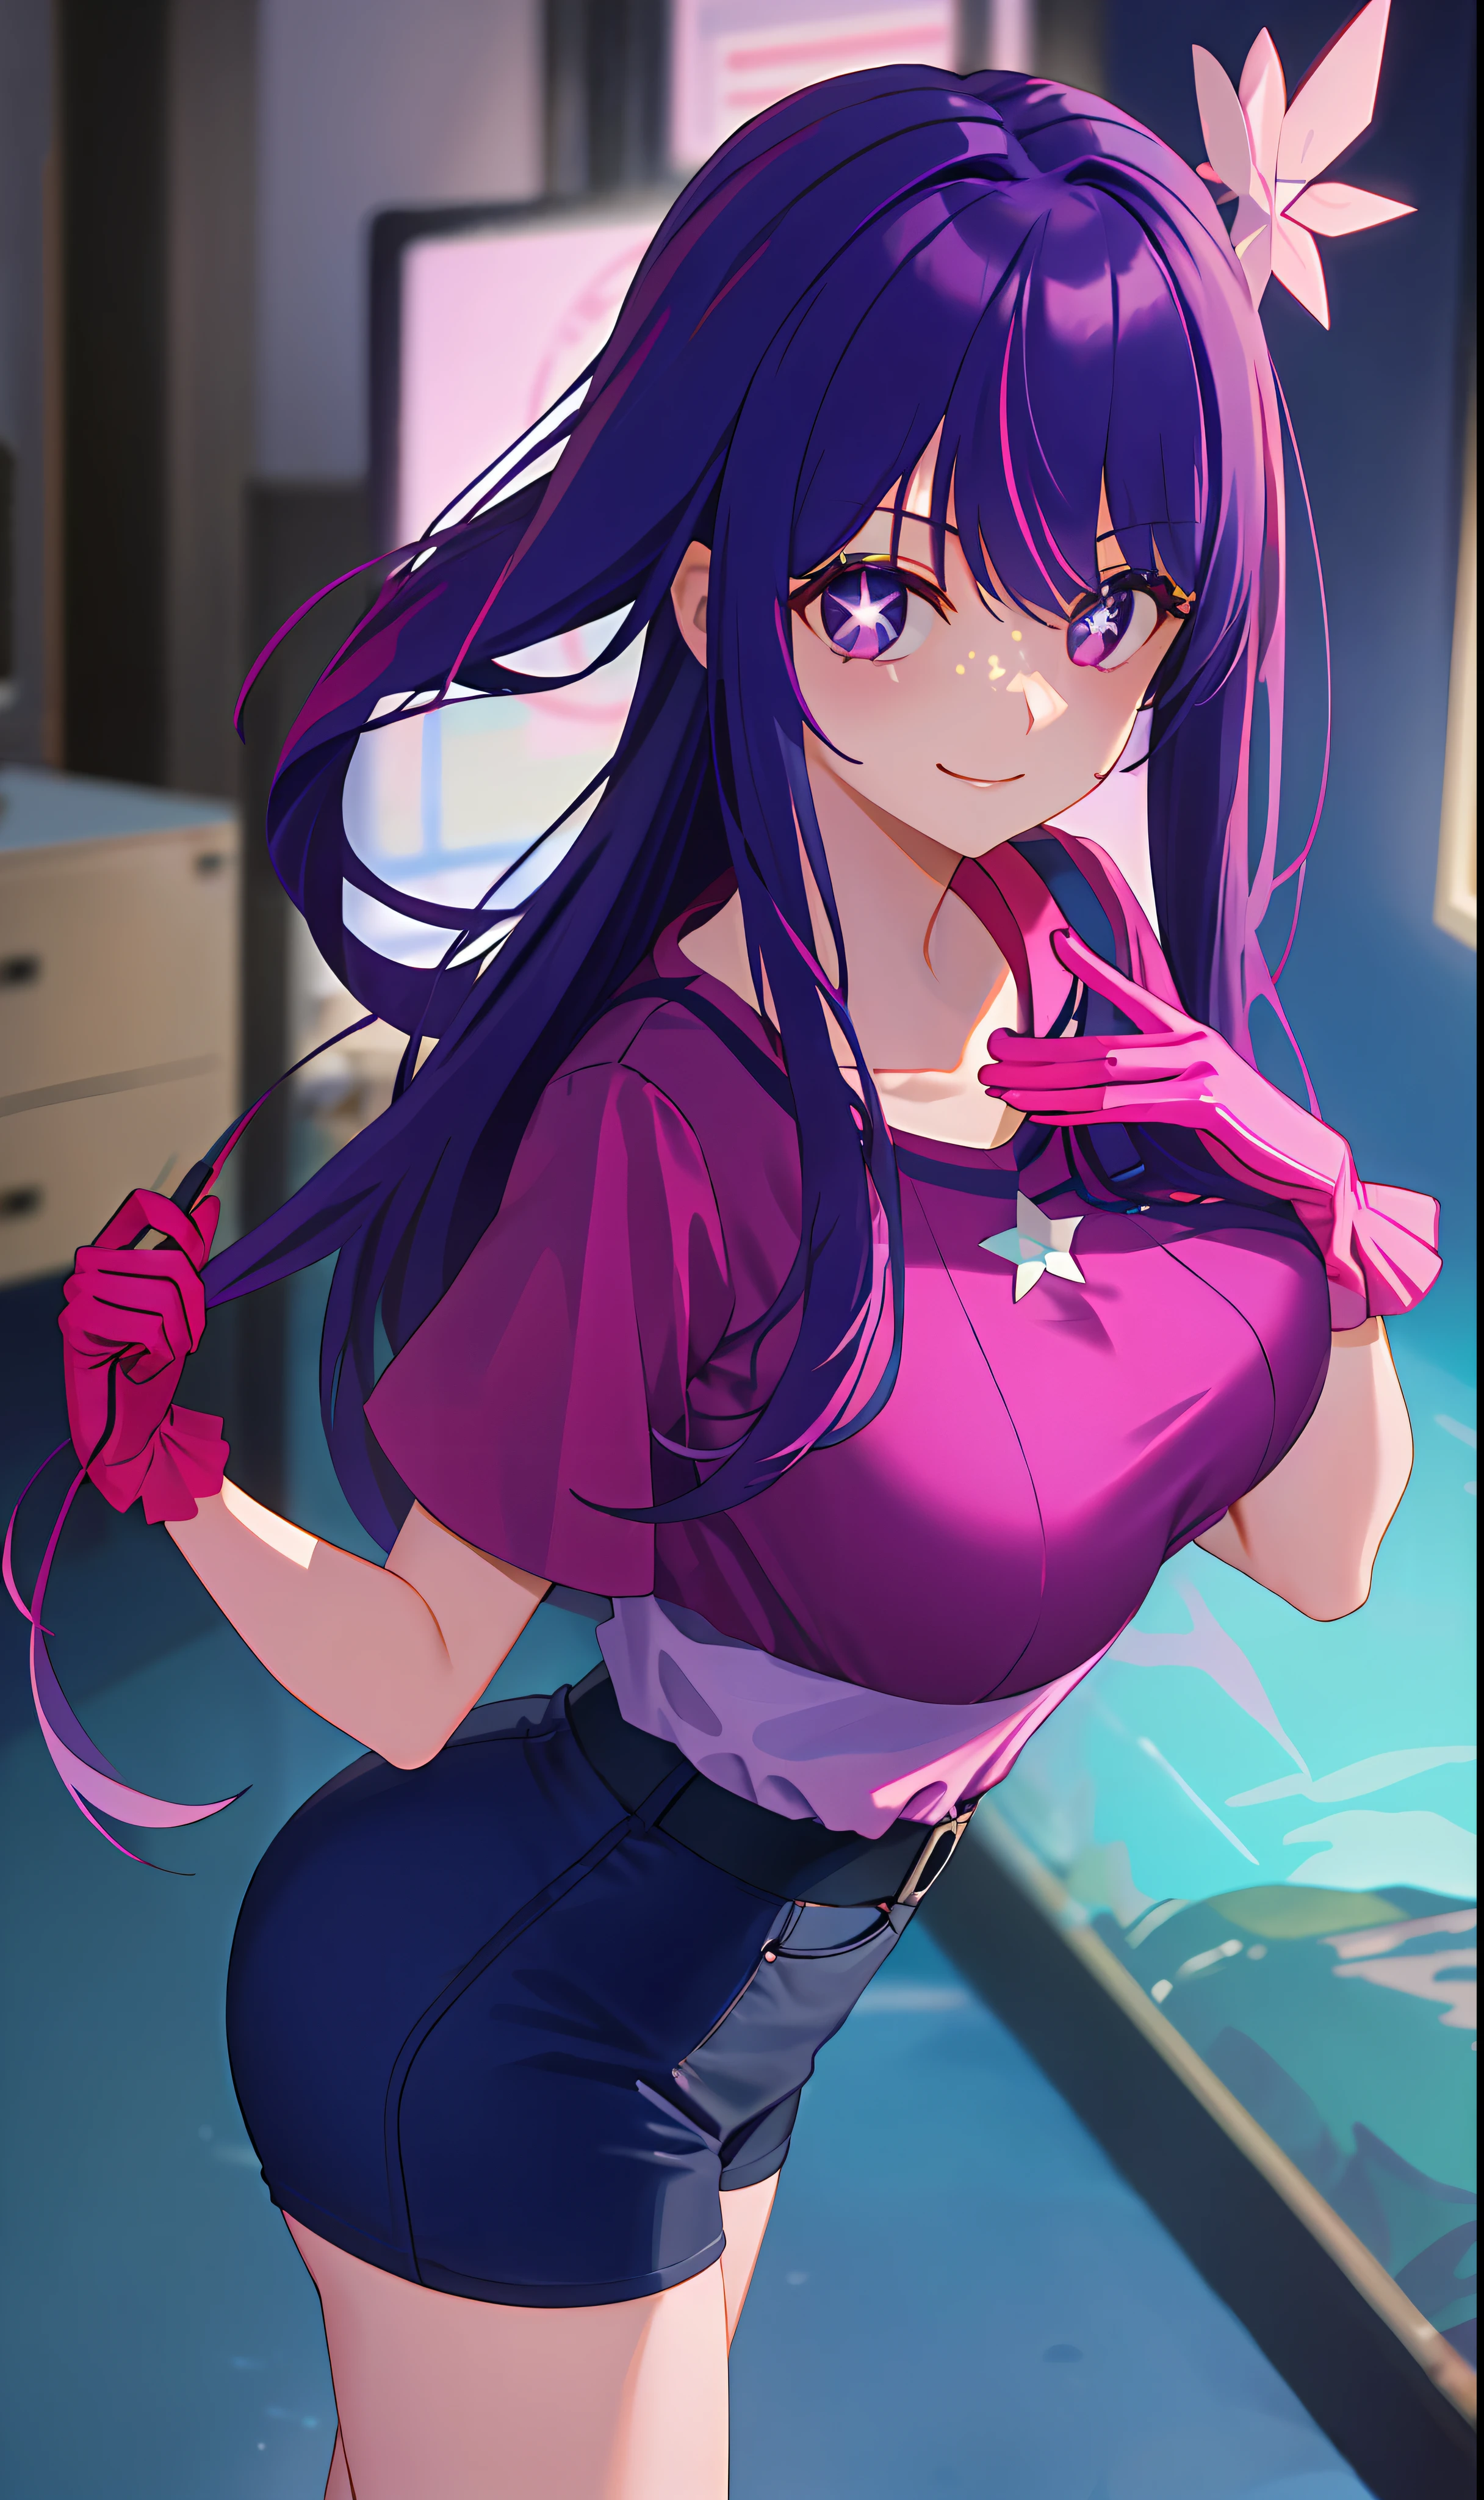 ((Masterpiece, Best Quality)), (1 person), Purple Hair, Hello, Horn, (OL)), Bangs, Medium, (Breast Augmentation), Slim, Smile, [Wide Hips], Office, Standing, Are\(Blue Archive), Pink Clothes, Pink Gloves, Stars in the Eyes